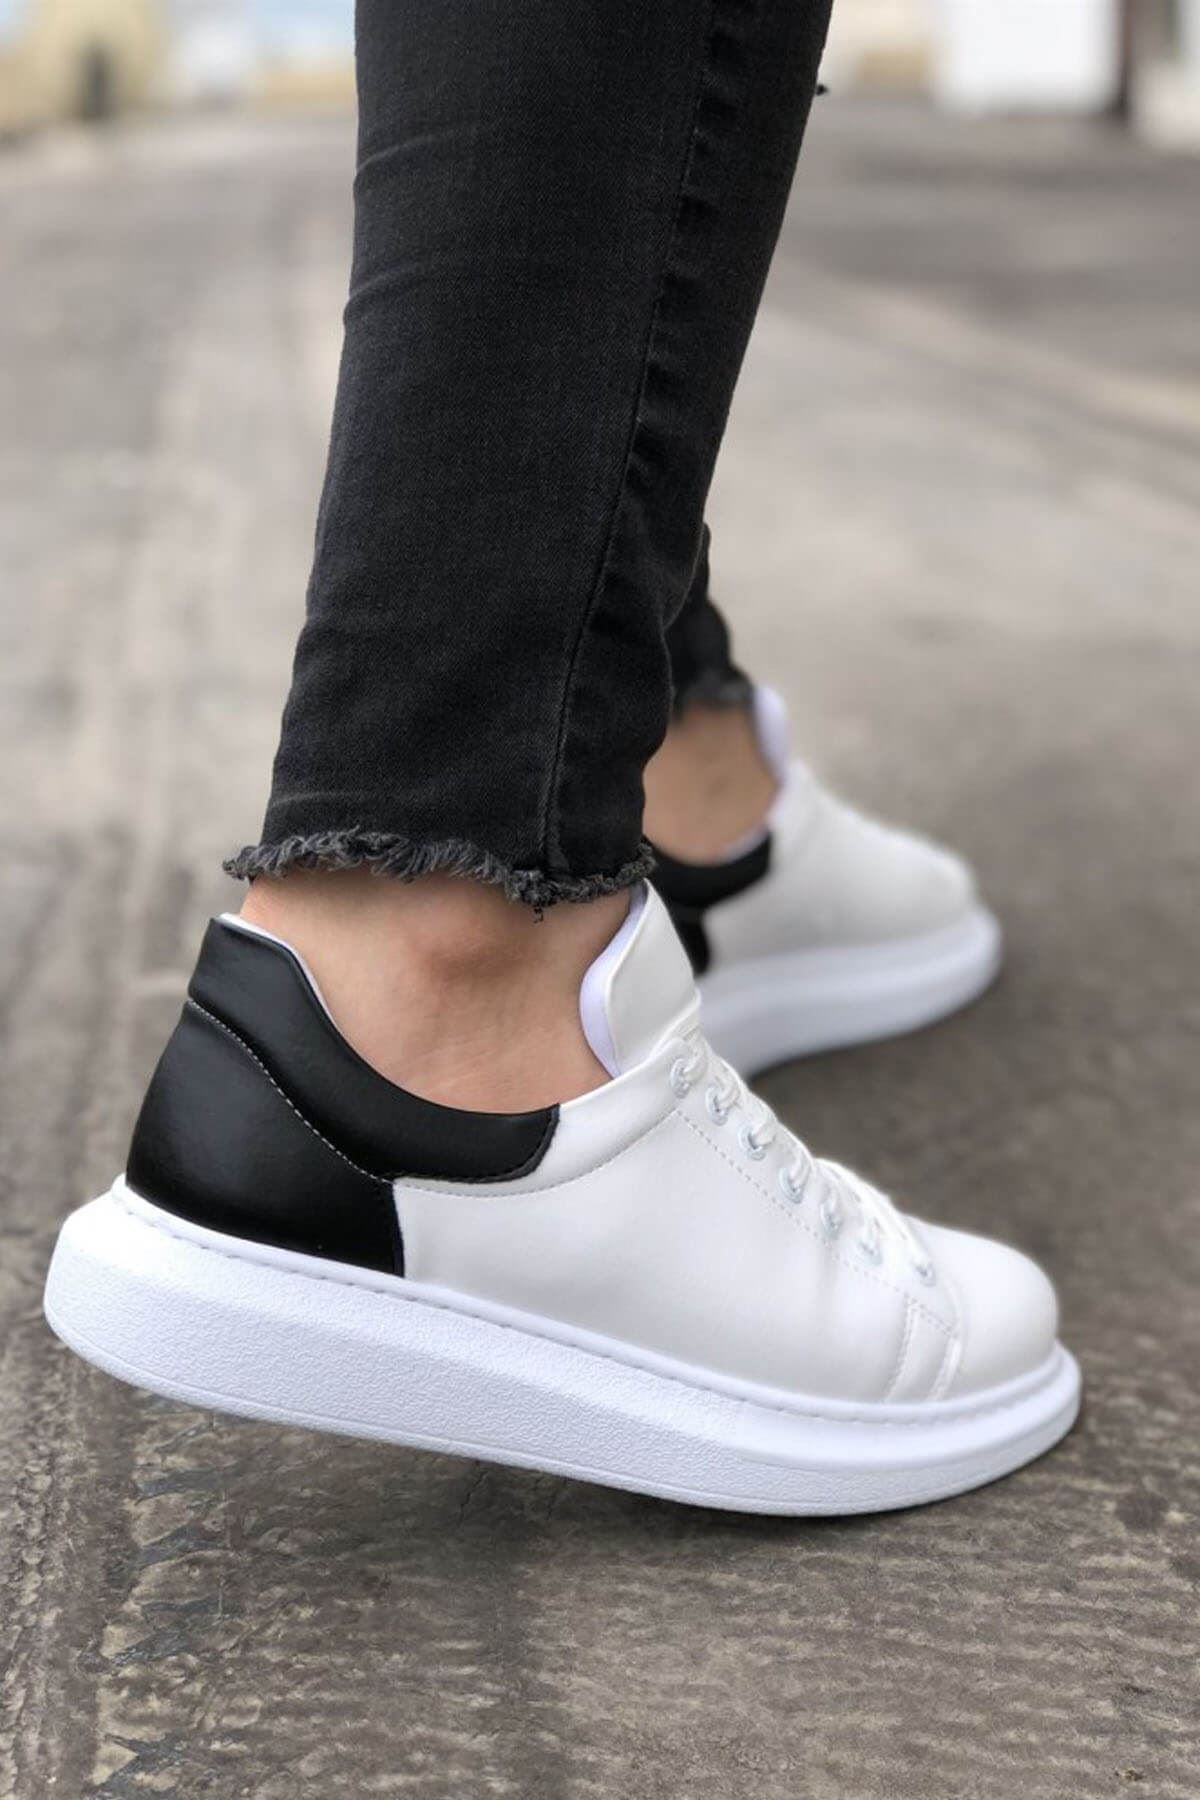 CH256 Men's Unisex White-Black Casual Sneaker Sports Shoes - STREETMODE ™